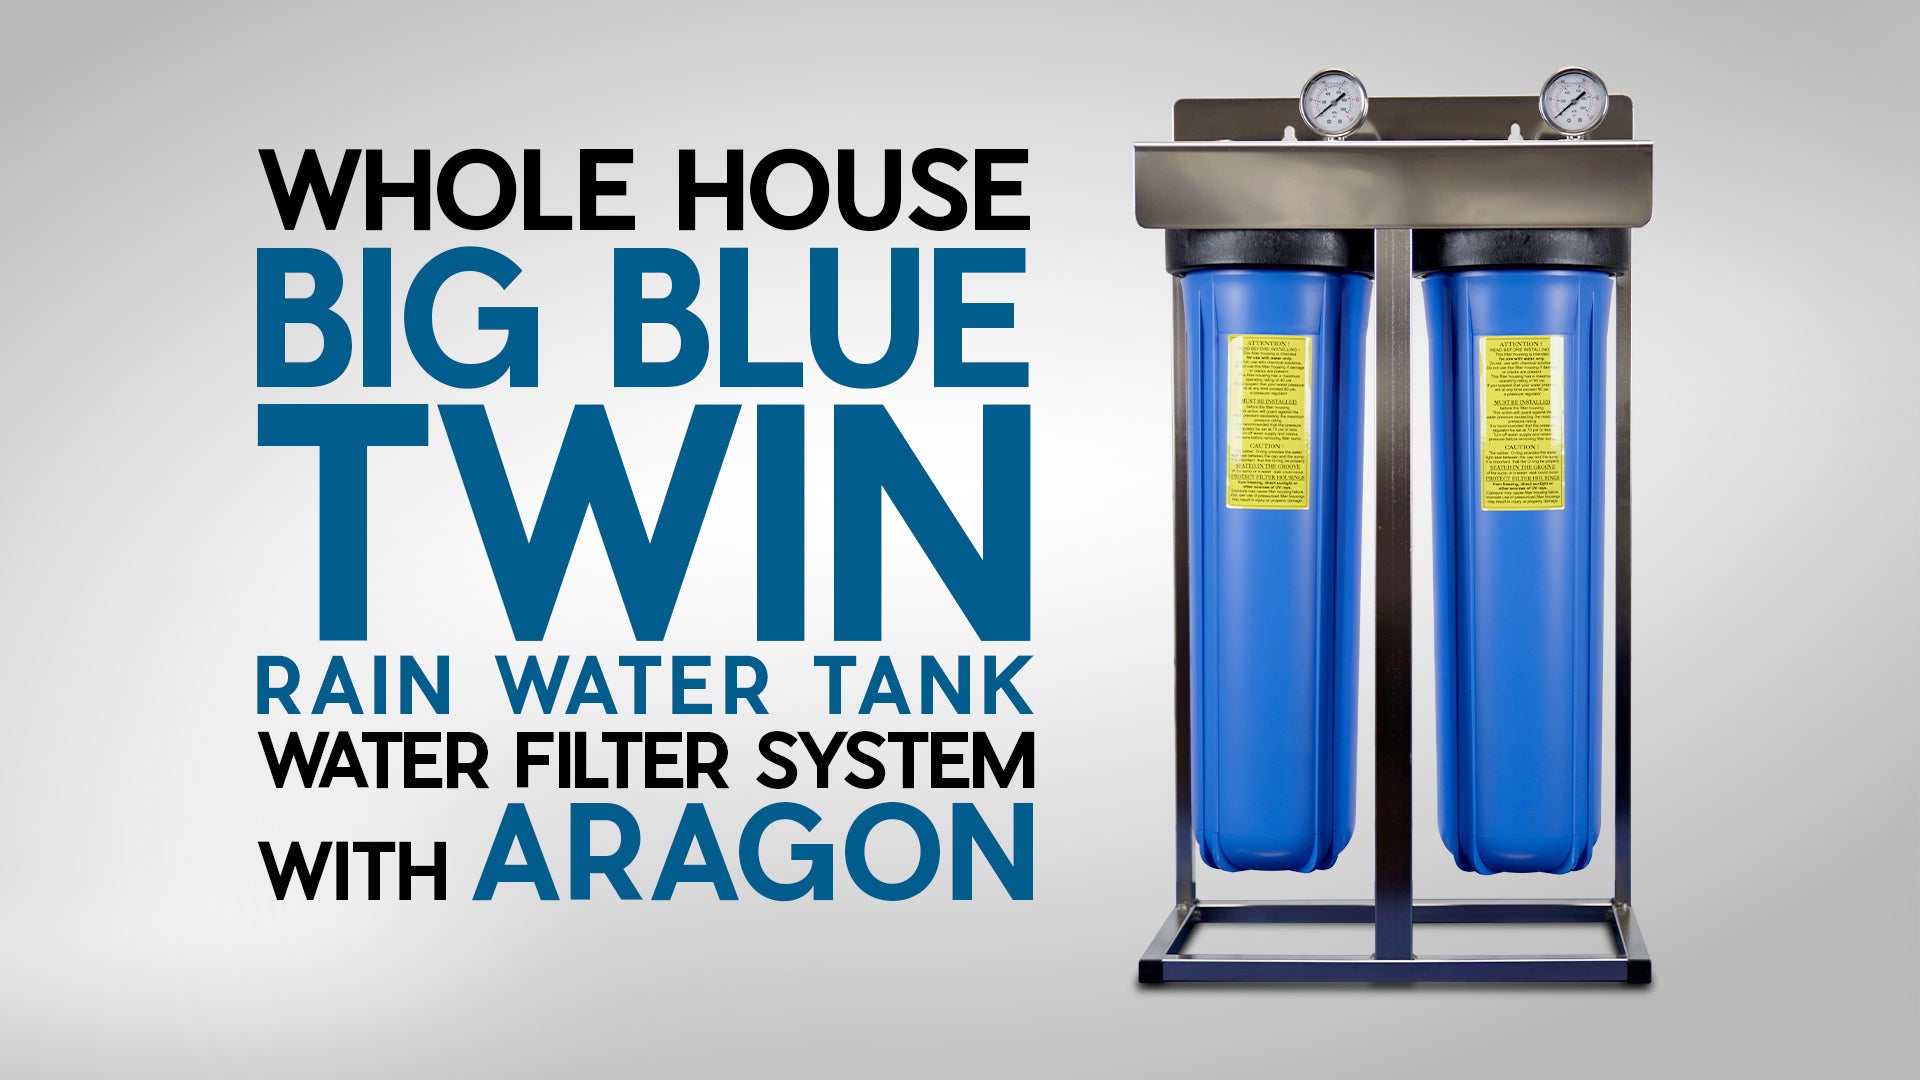 MWF 20" x 4.5" Twin Big Blue Whole House Rain Water Tank Water Filter System with Aragon - Product Spotlight [VIDEO]